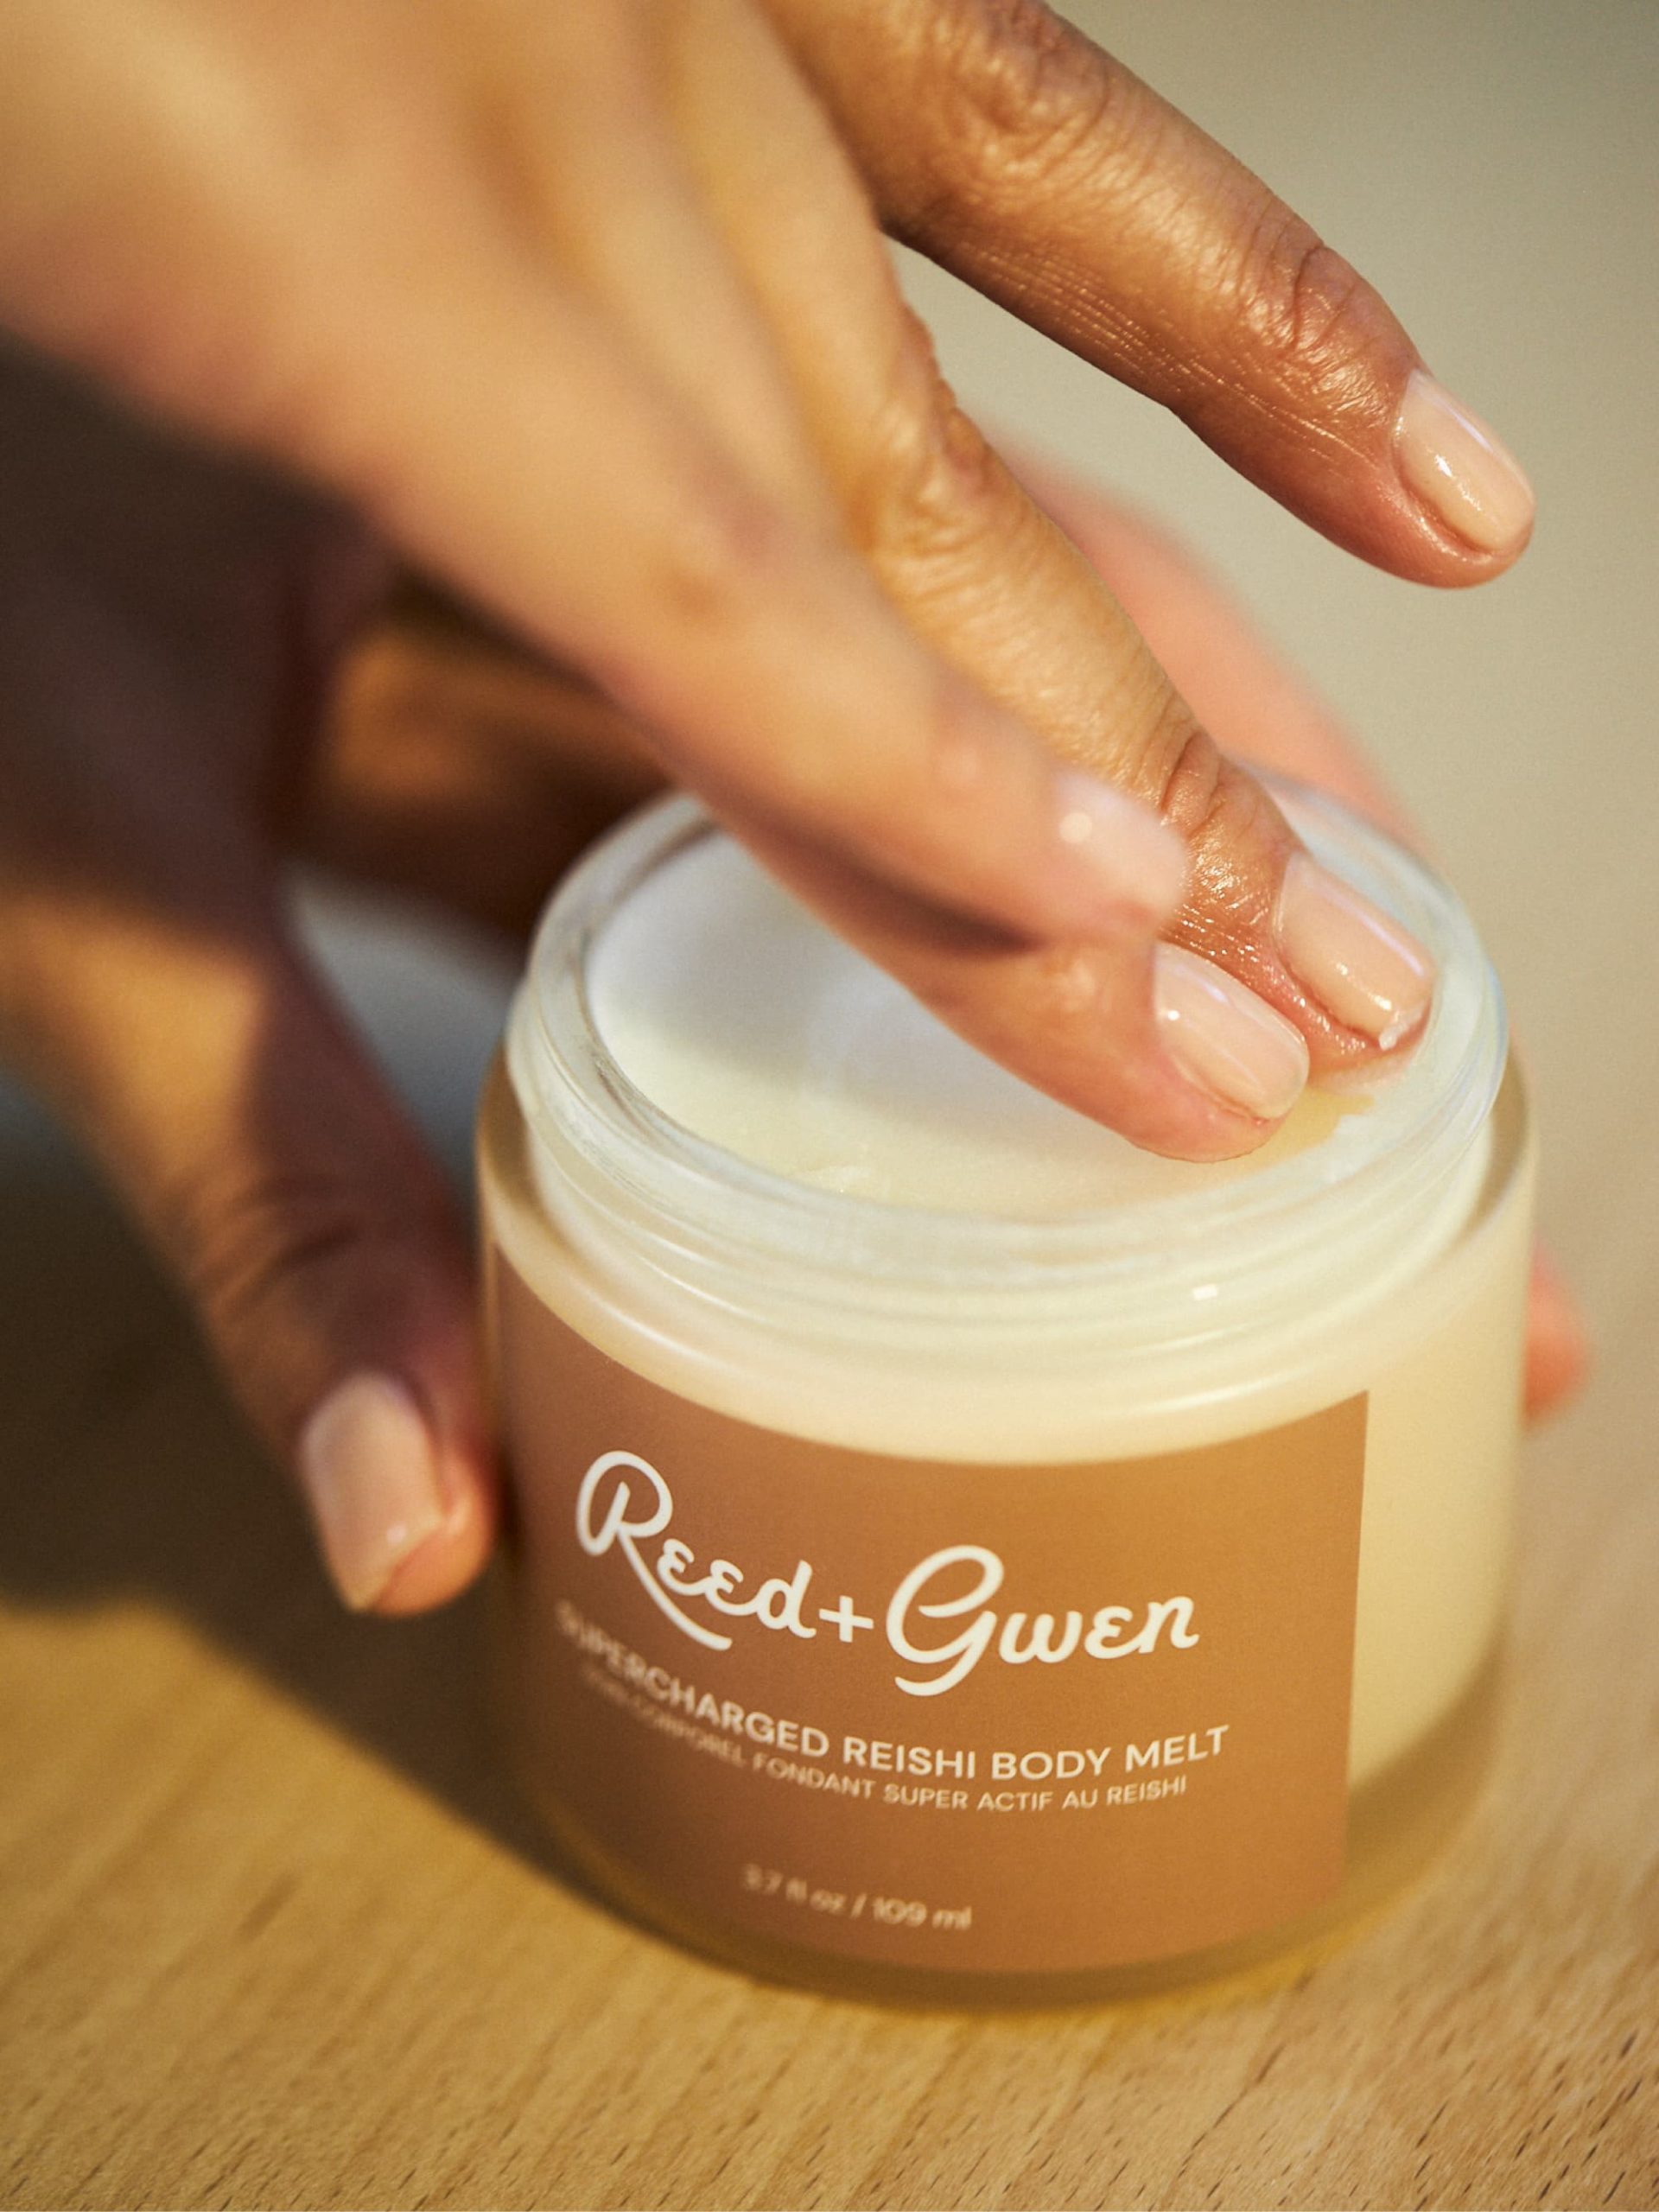 Reed + Gwen body and bath gifts are vegan and cruelty-free